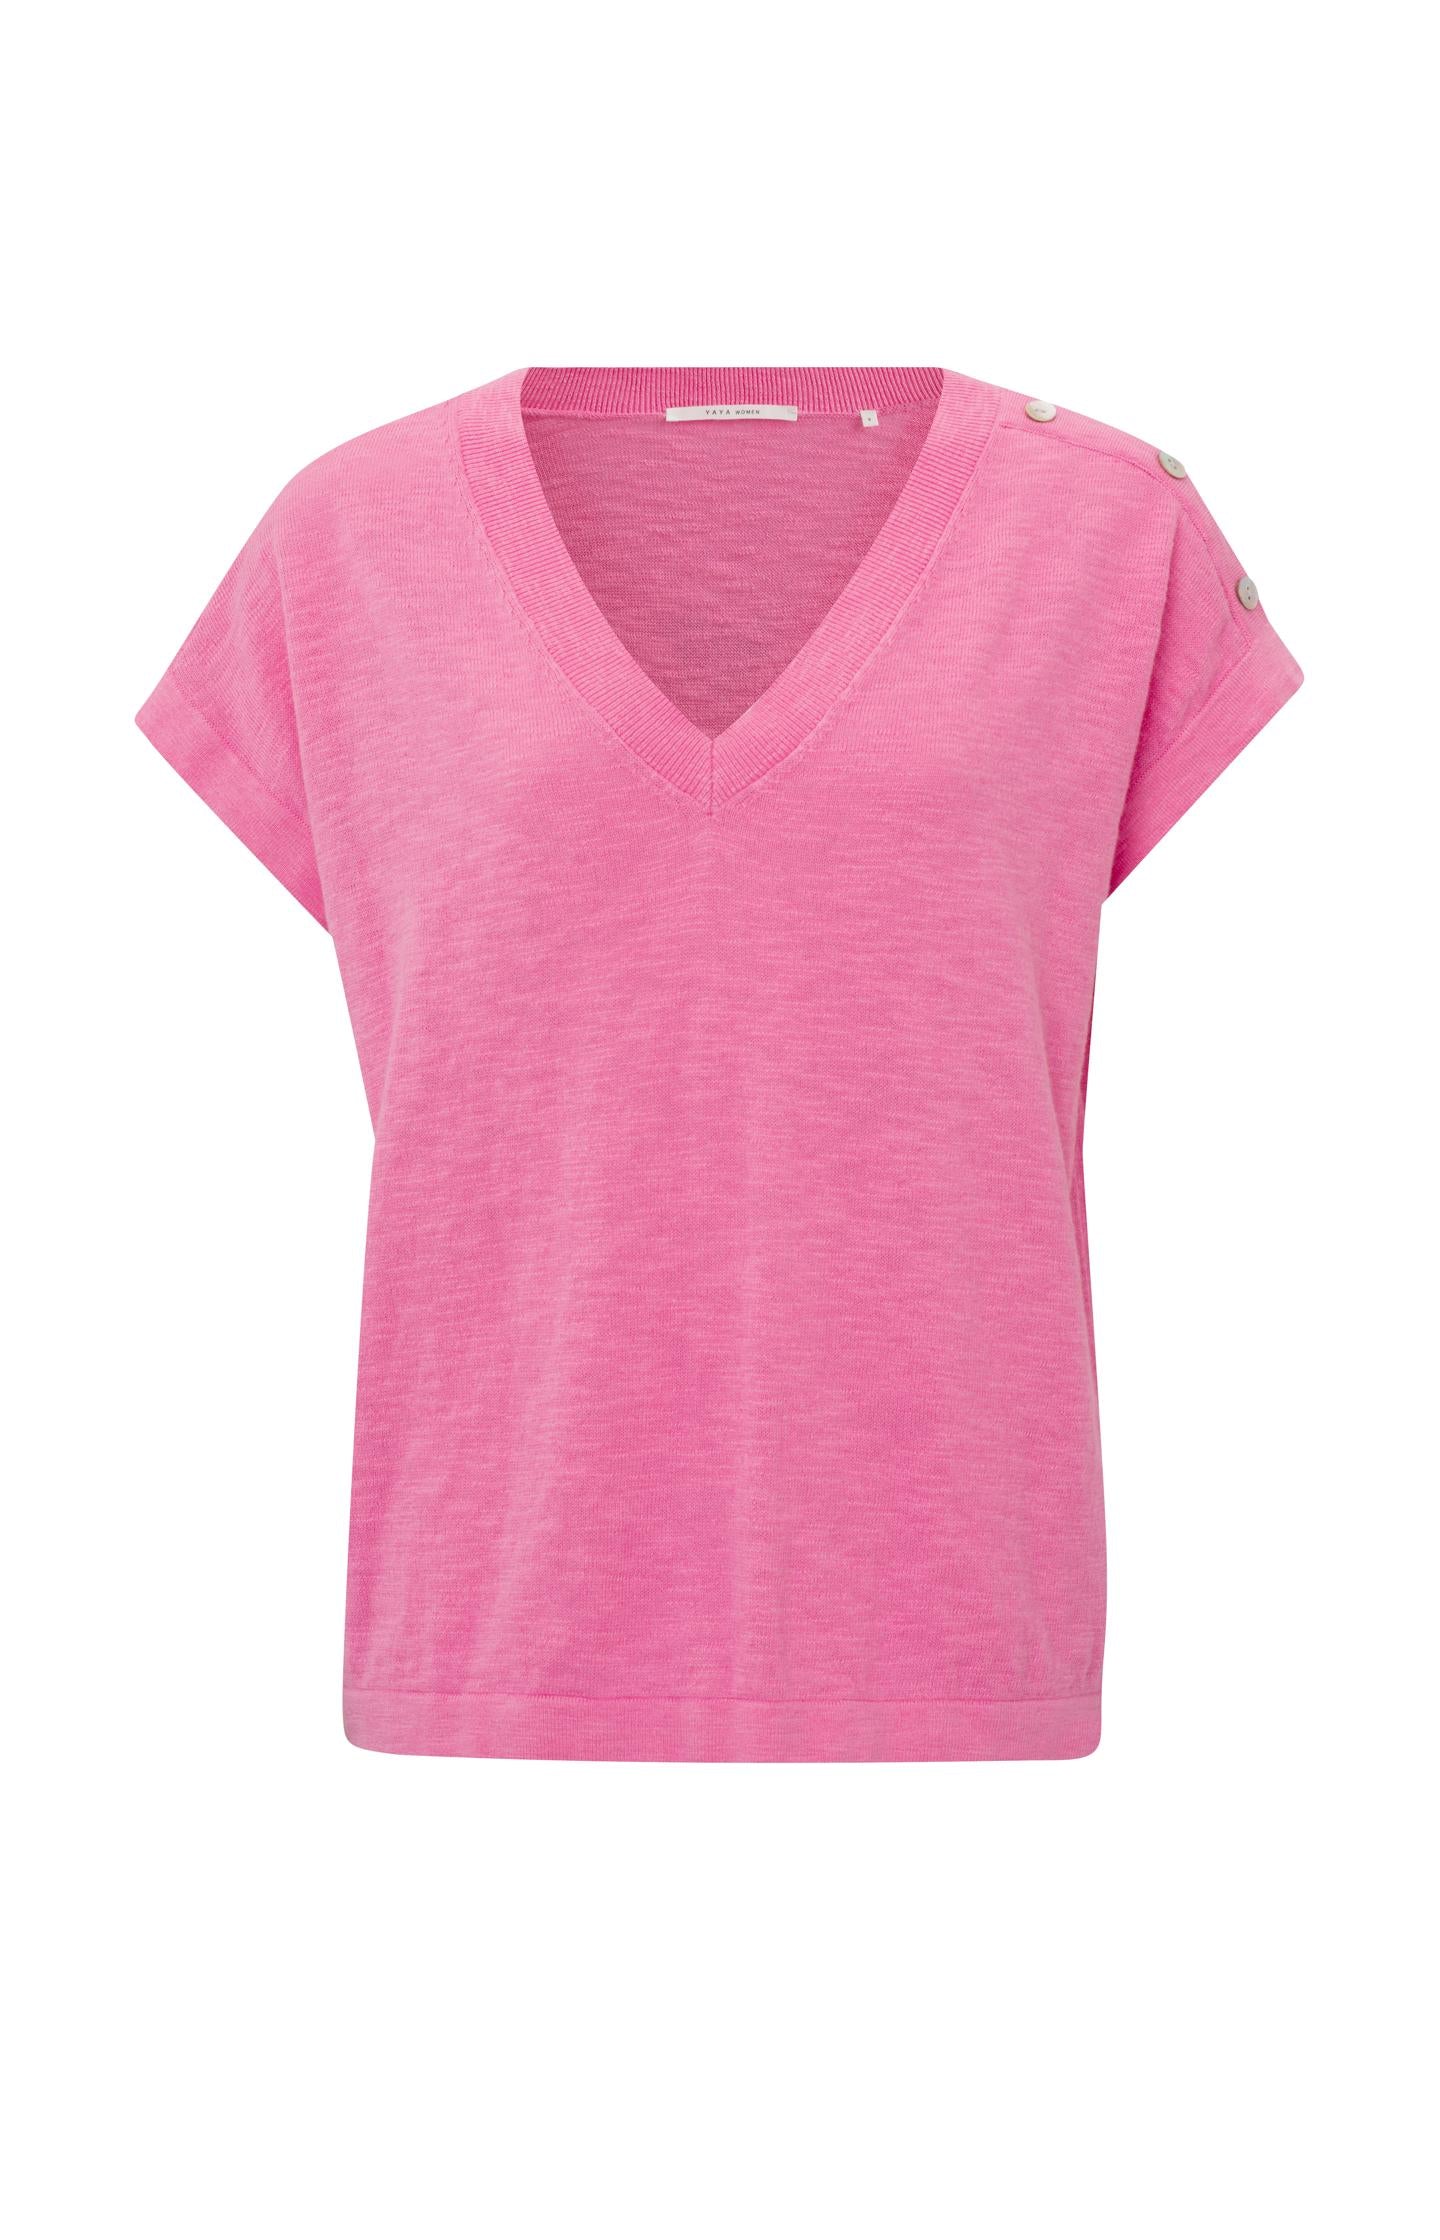 Sweater with short sleeves, V-neck and button detail - Type: product